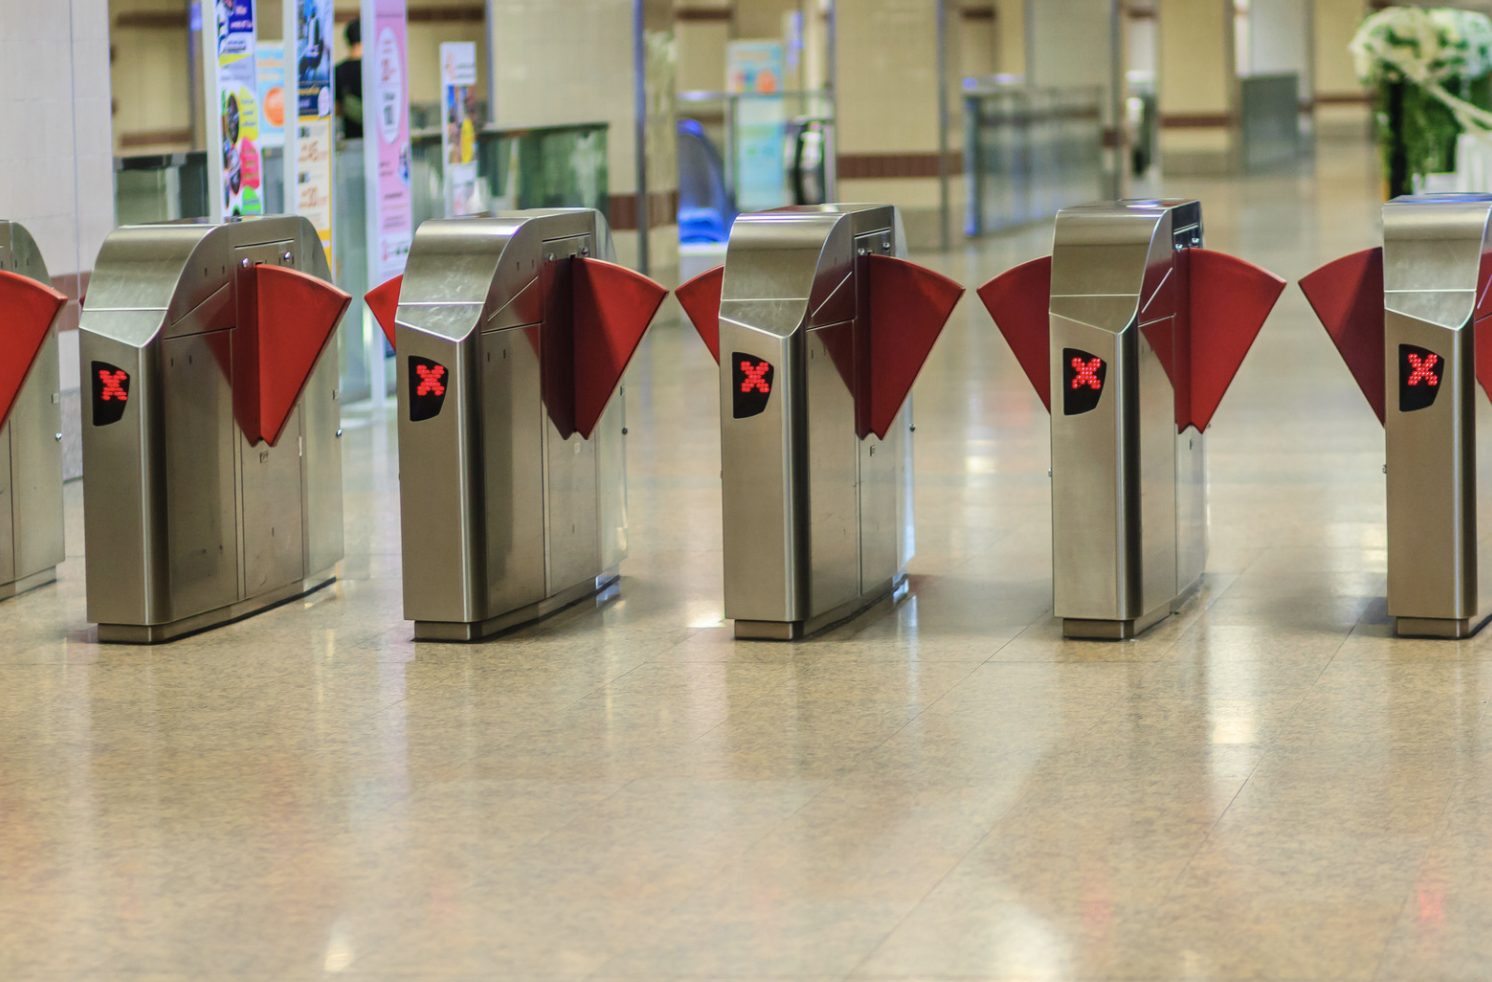 Turnstiles showing red x's so people don't pass